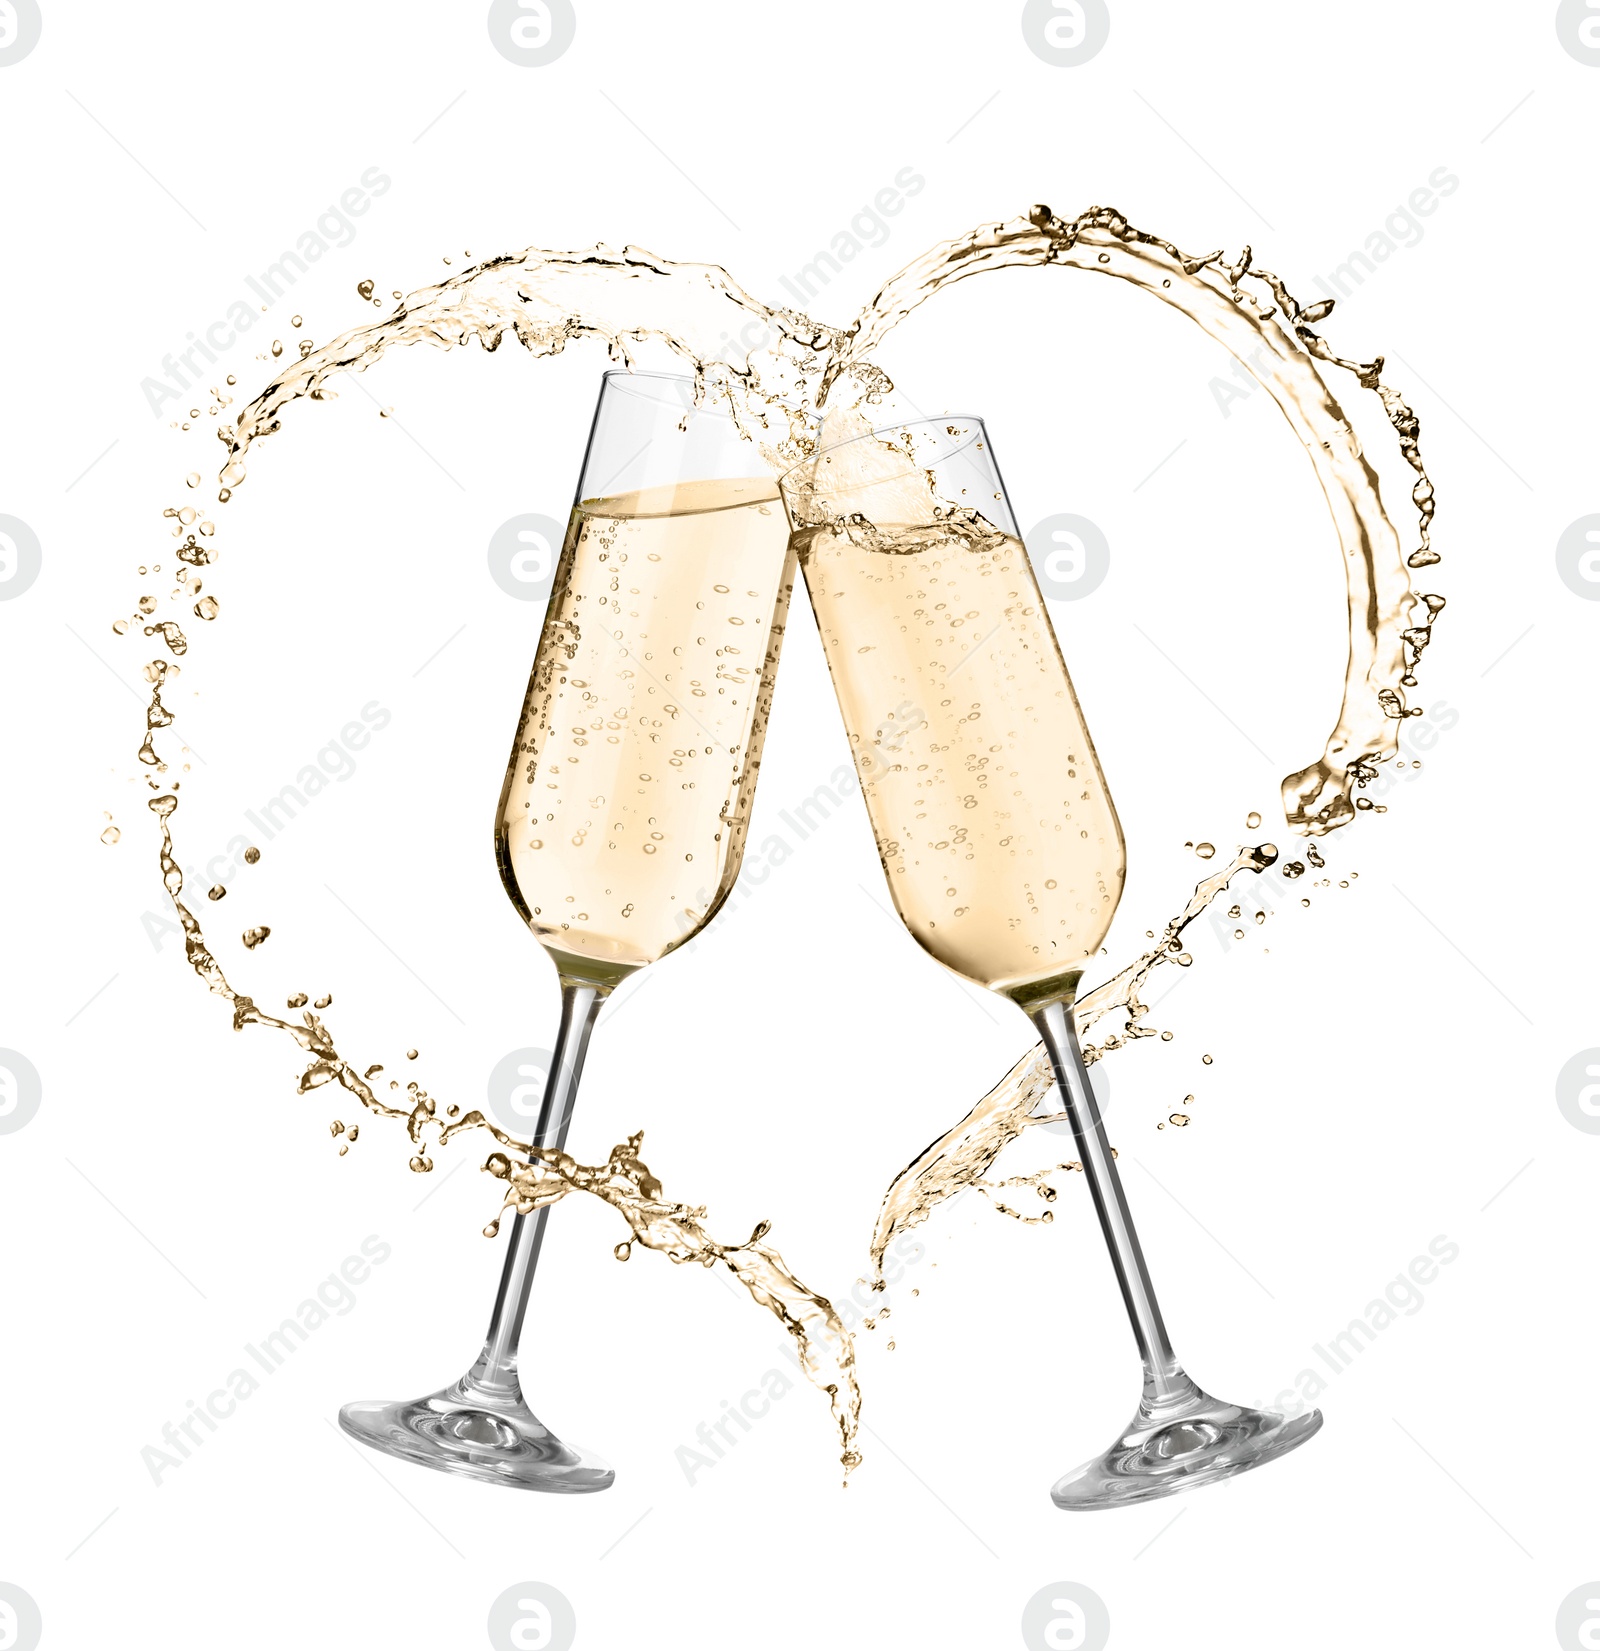 Image of Glasses with sparkling wine and splashes on white background